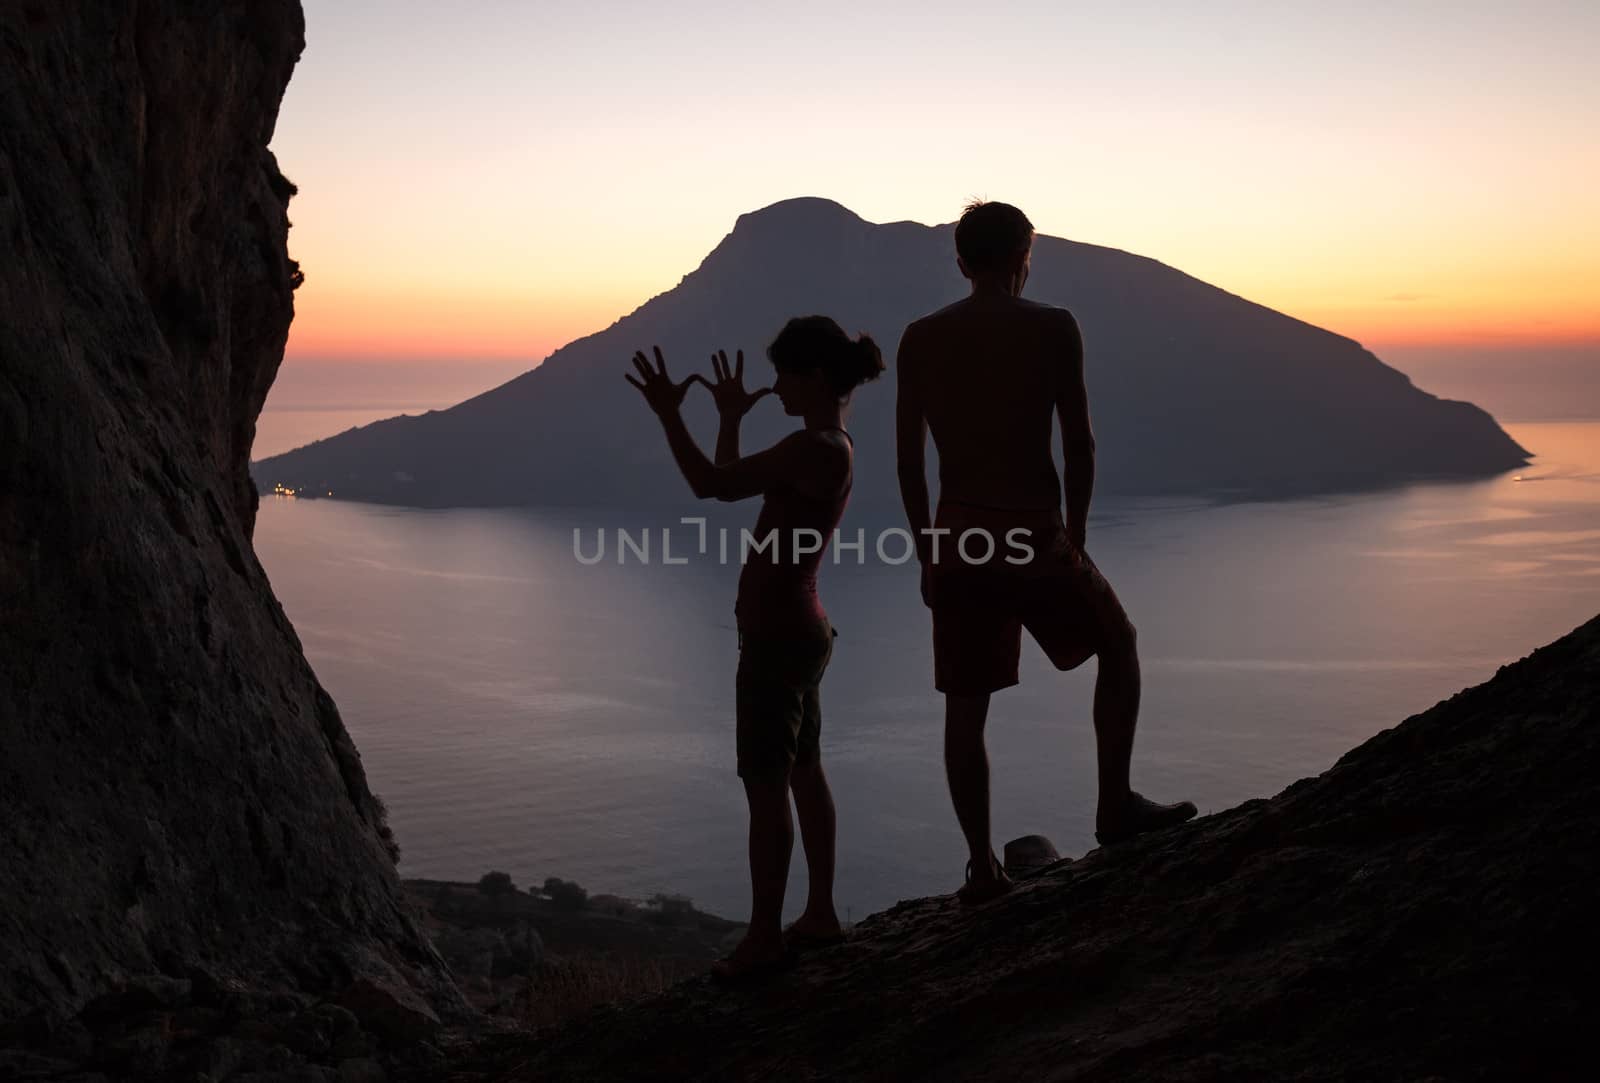 Silhouettes of two people having fun at sunset by photobac